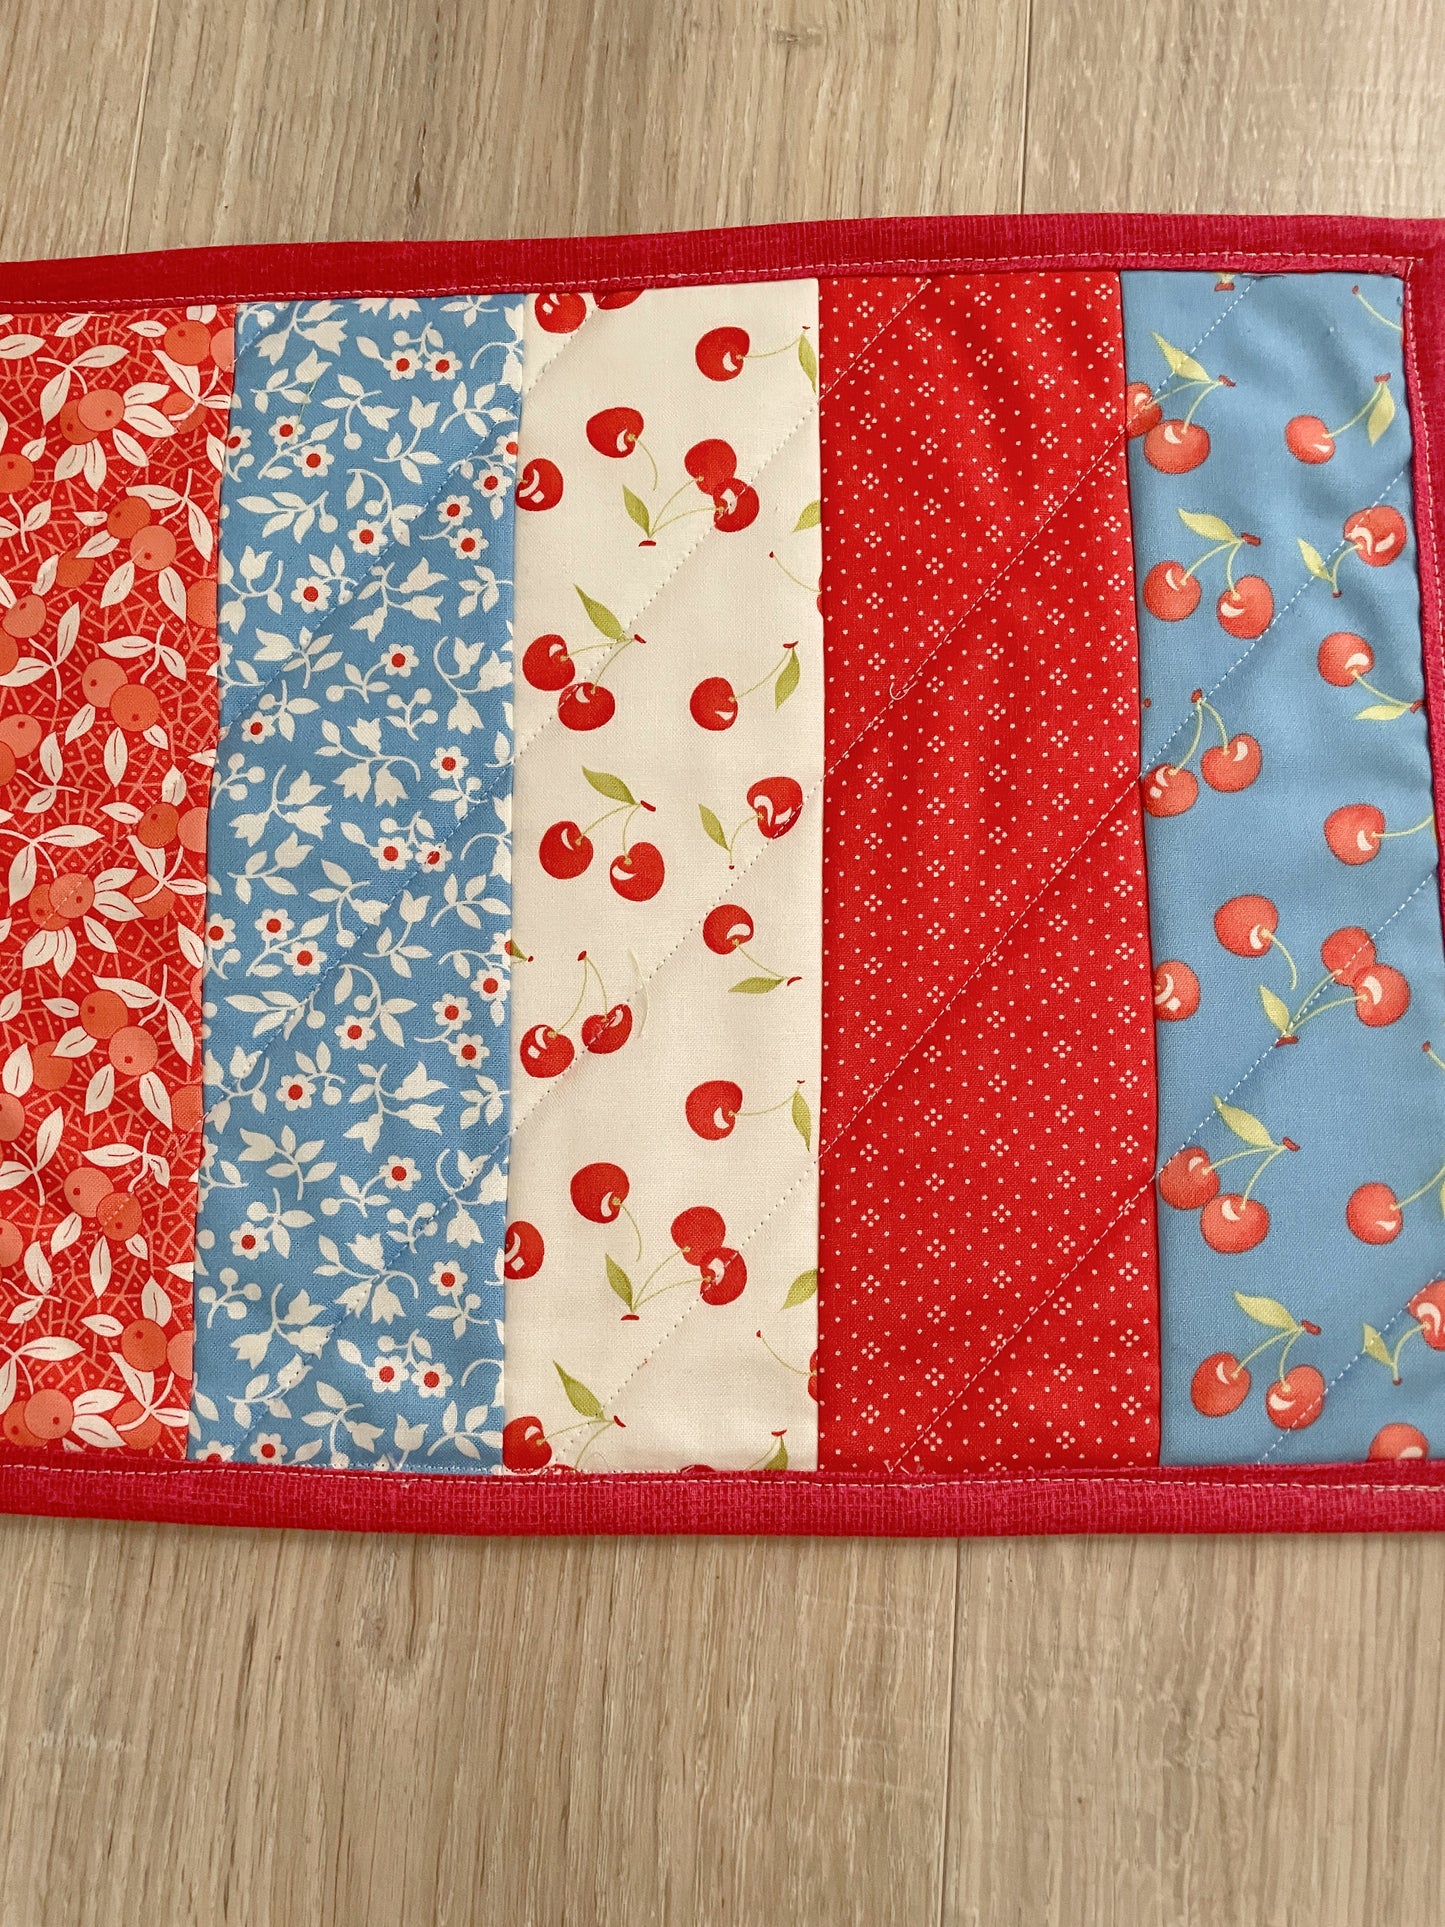 Handmade Quilted Casserole Hot Pad, Scrappy Oversized Kitchen Potholder